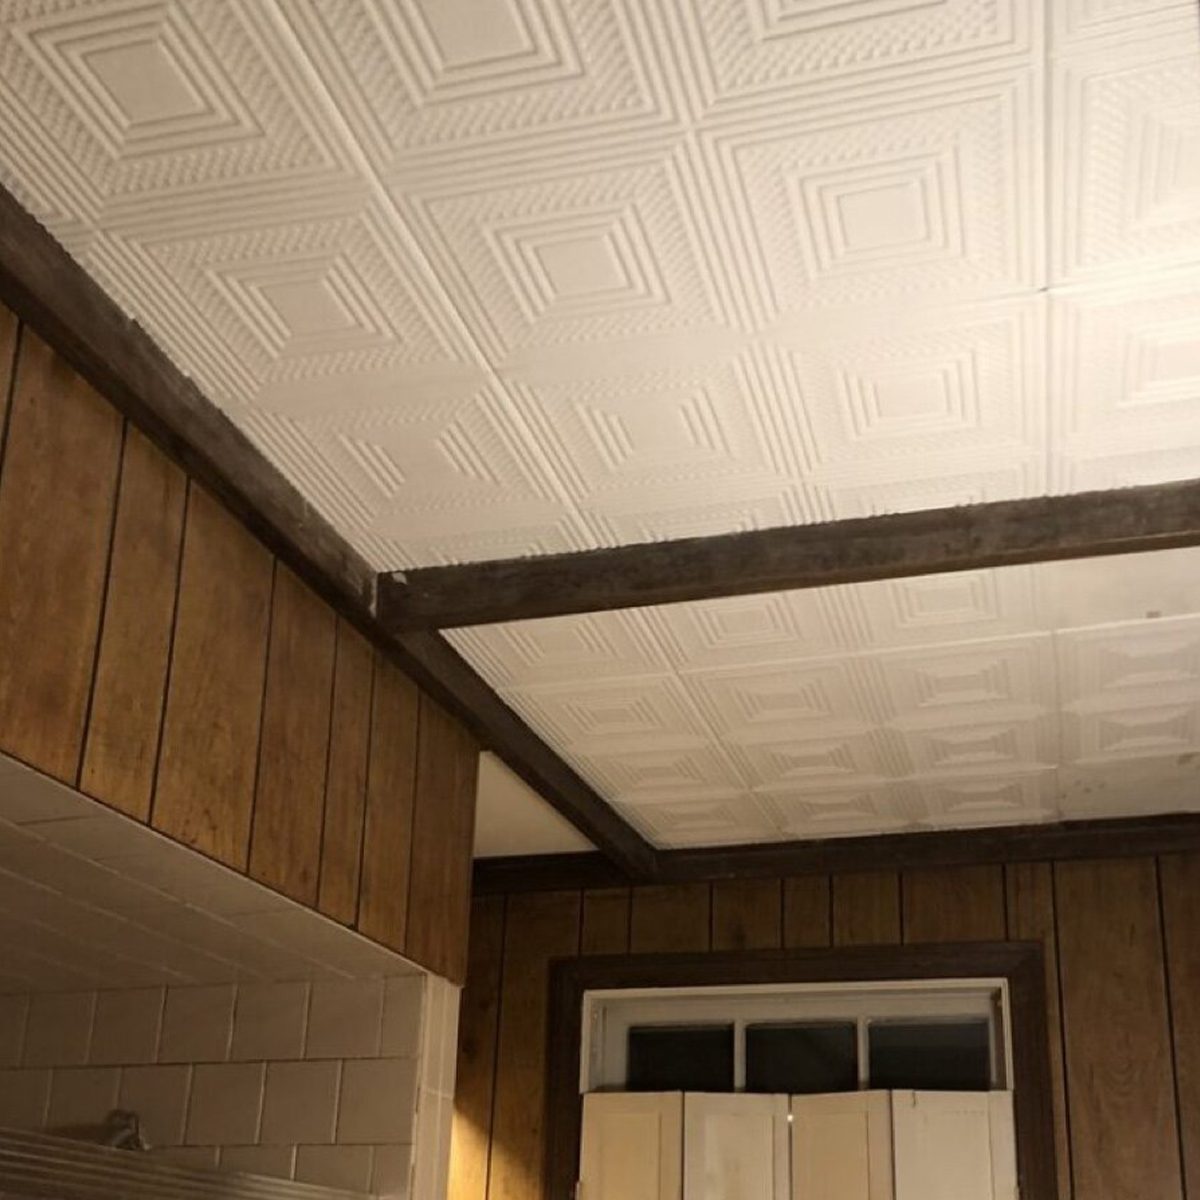 11 Clever Ways To Hide Electrical Wires For A Good-looking Ceiling